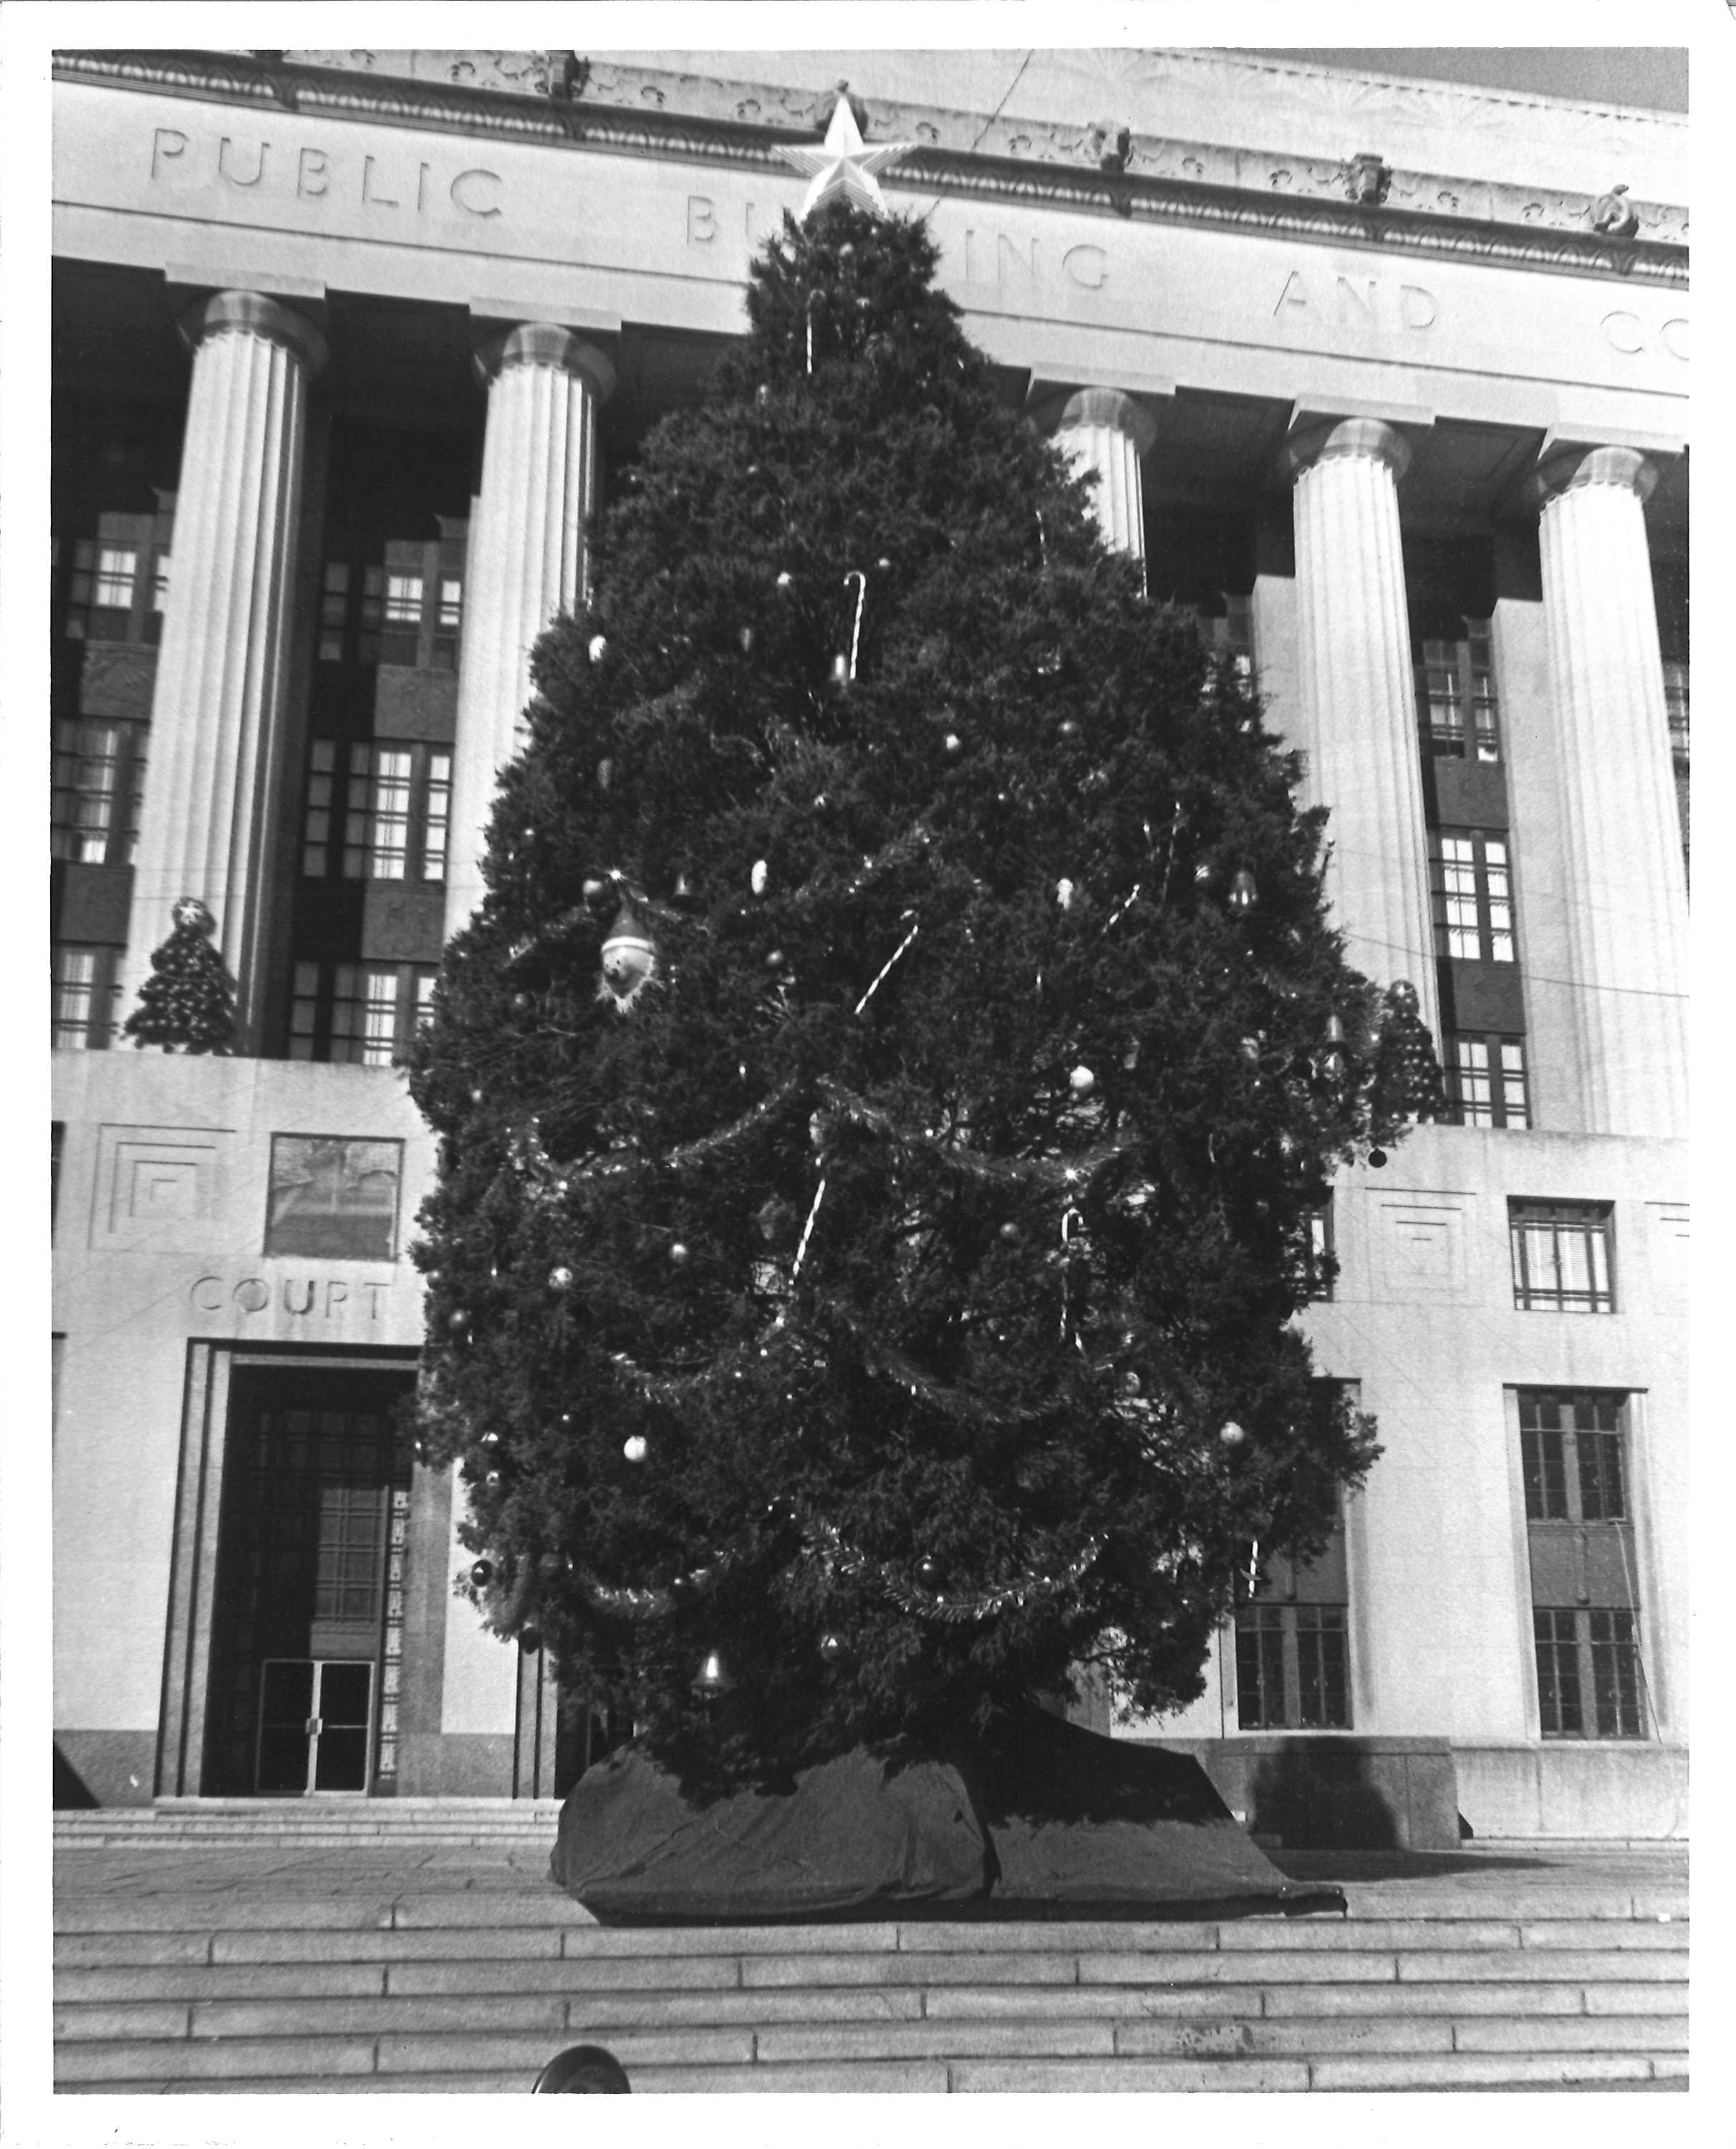 Metro Archives Collection - Photo of the courthouse Christmas tree in 1974